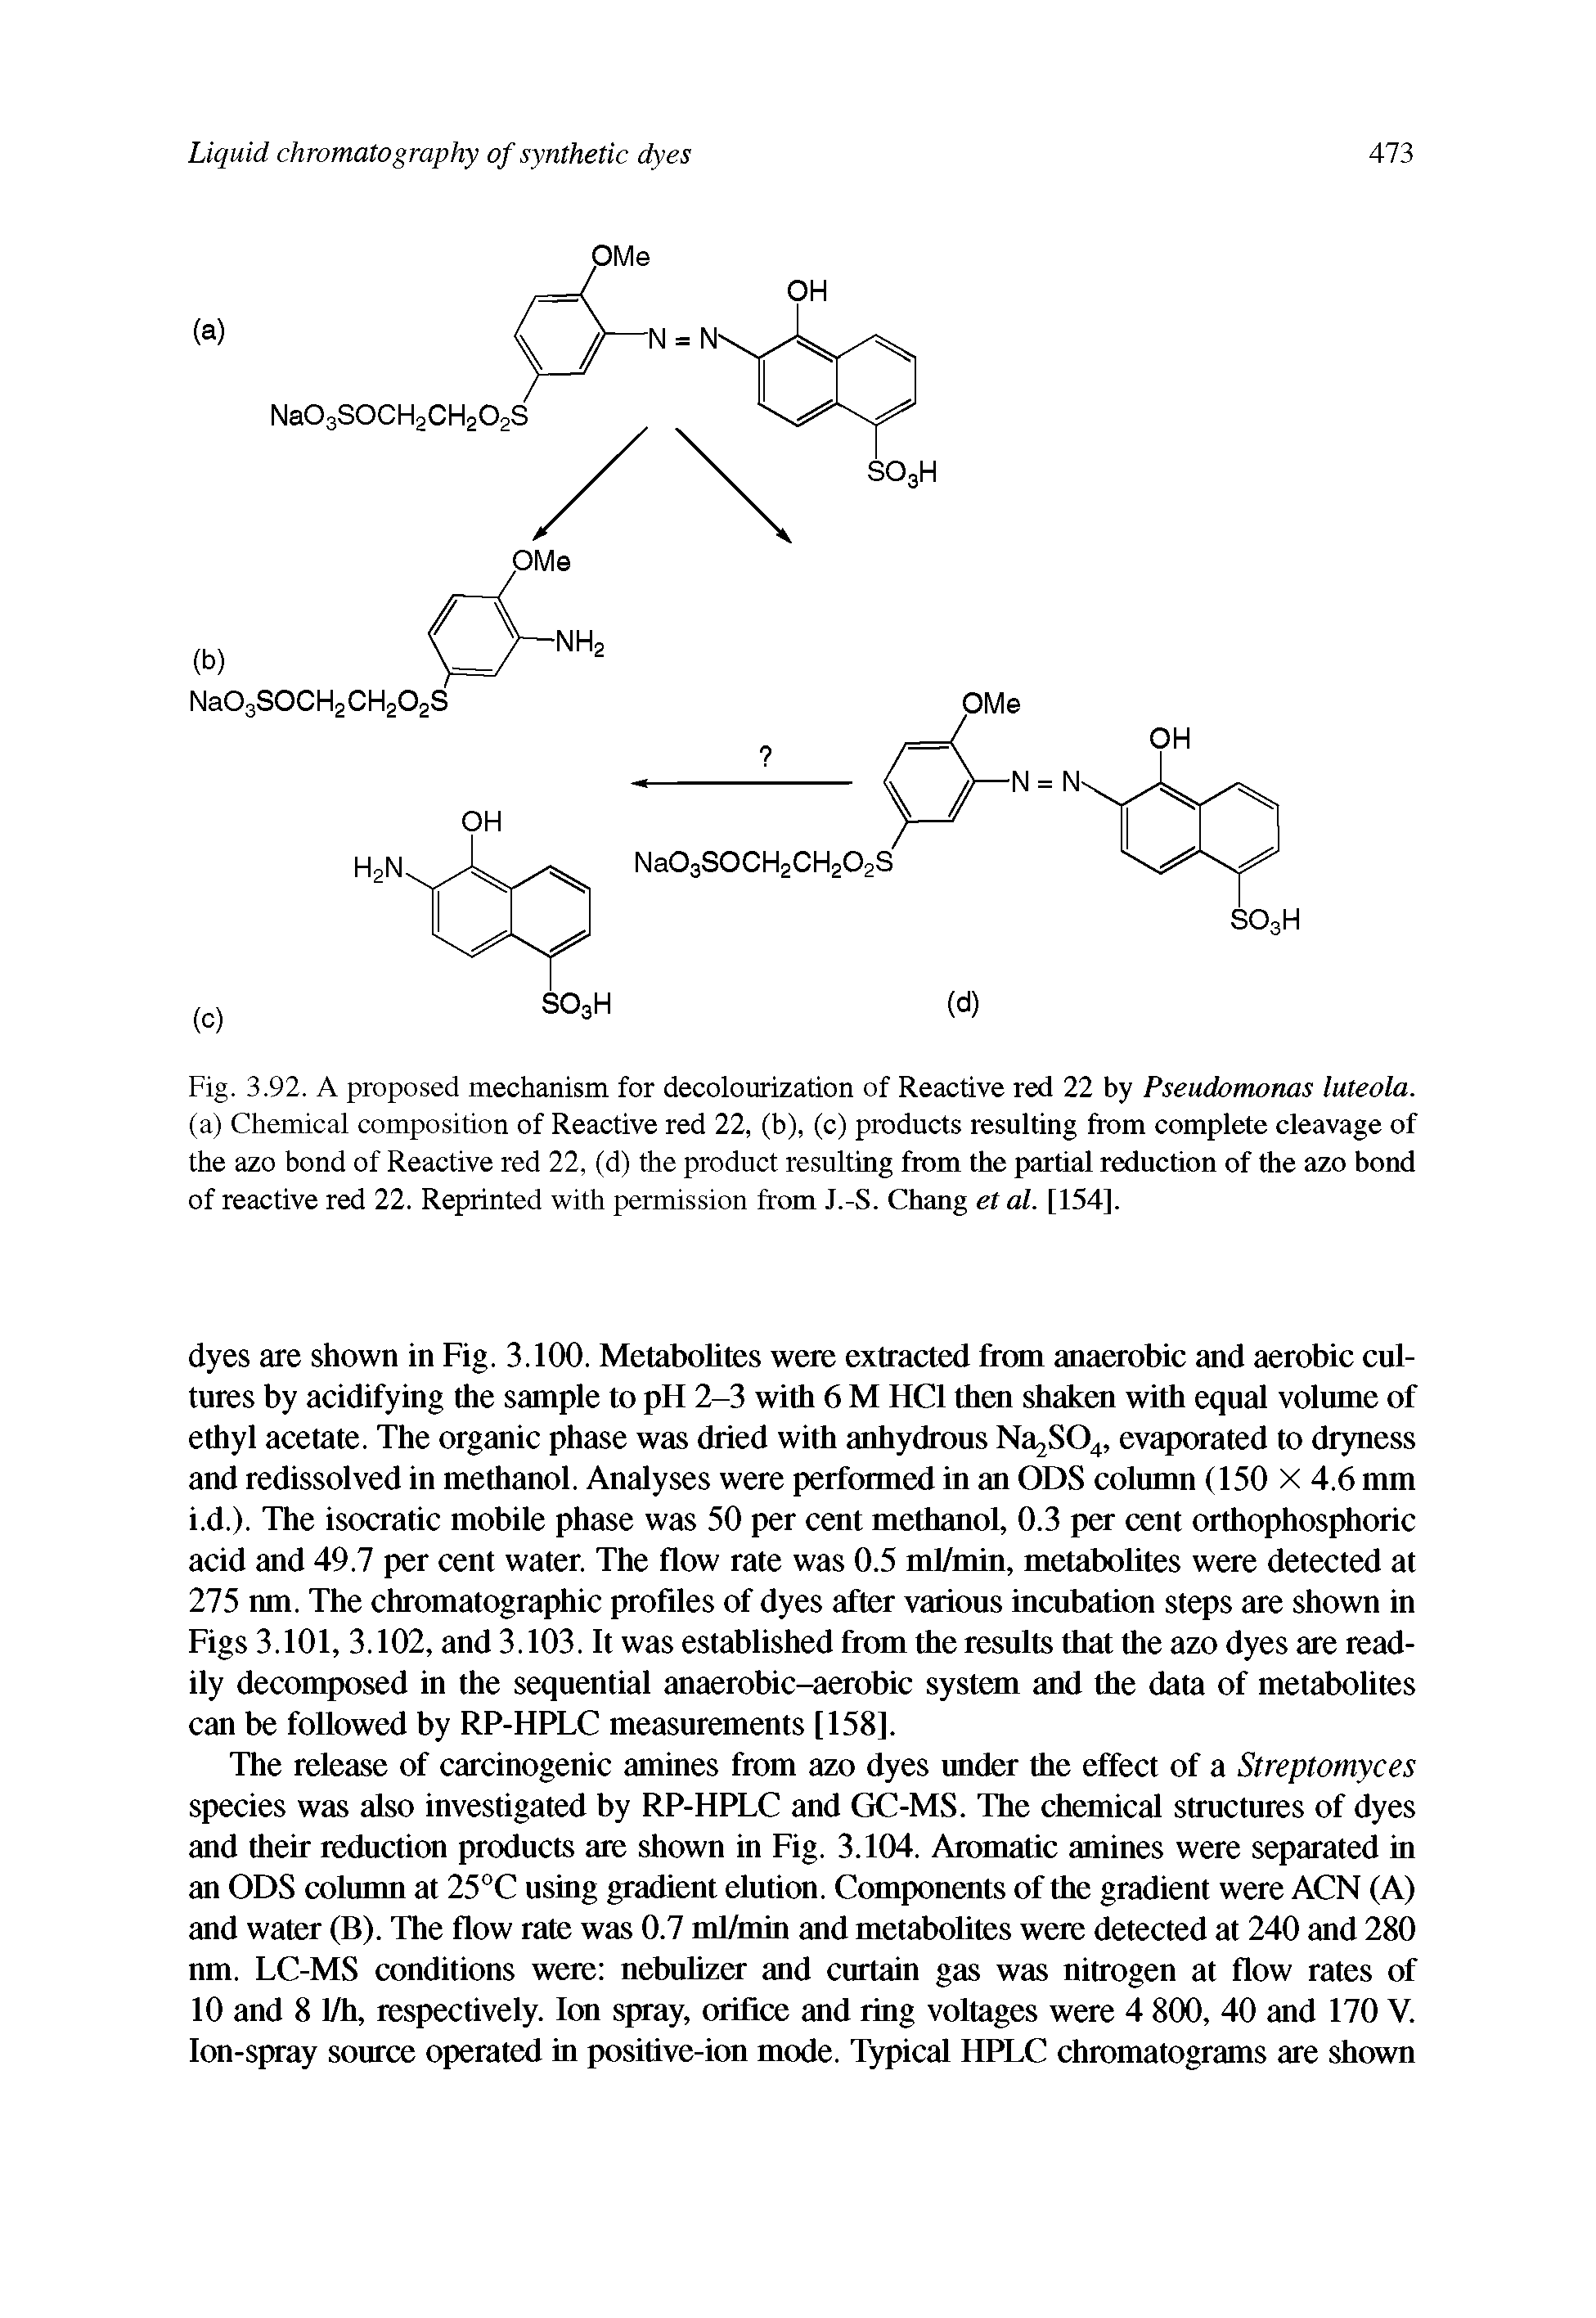 Fig. 3.92. A proposed mechanism for decolourization of Reactive red 22 by Pseudomonas luteola. (a) Chemical composition of Reactive red 22, (b), (c) products resulting from complete cleavage of the azo bond of Reactive red 22, (d) the product resulting from the partial reduction of the azo bond of reactive red 22. Reprinted with permission from J.-S. Chang et al. [154].